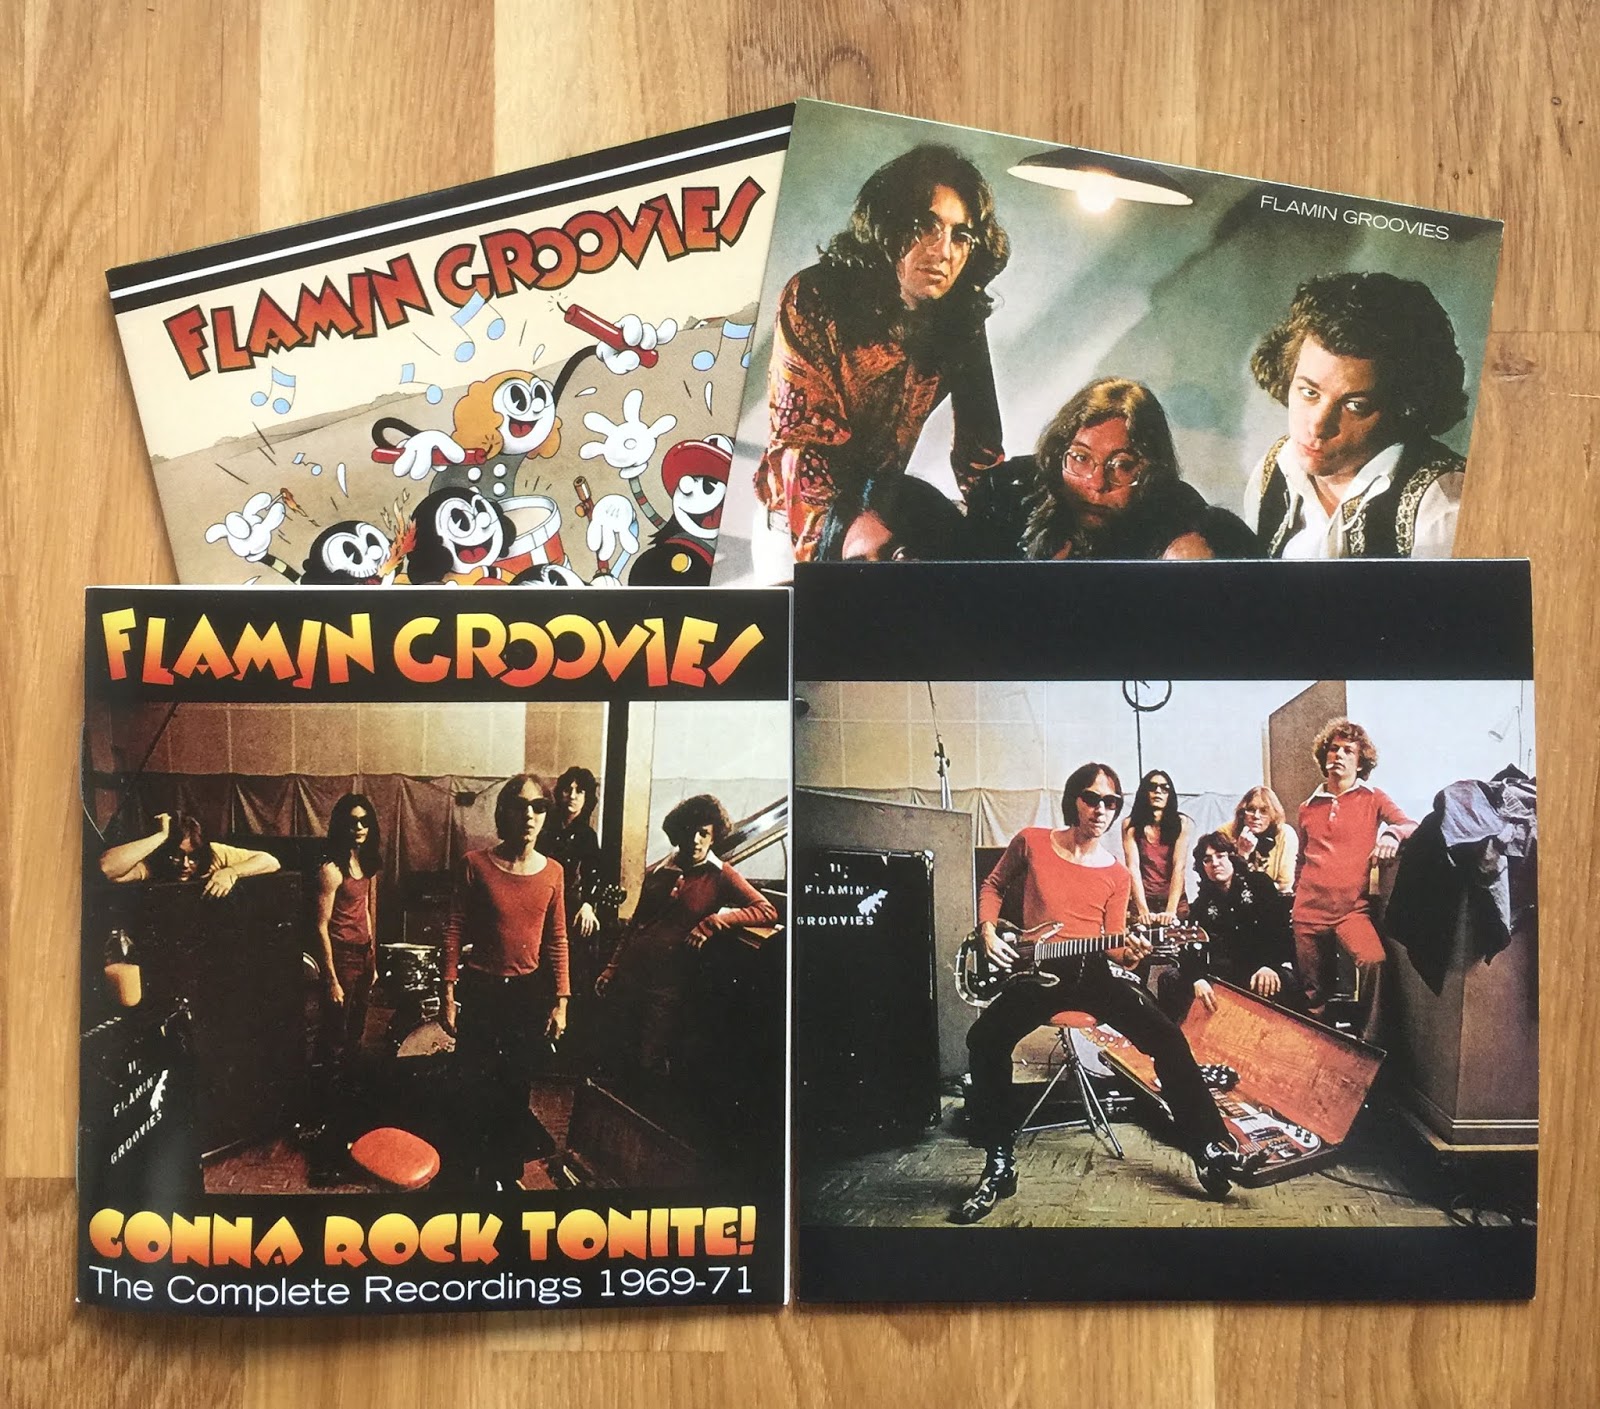 Sounds Good Looks Good Gonna Rock Tonite The Complete Recordings 1969 1971 By Flamin Groovies February 19 Uk Grapefruit Records 3cd Box Set A Review By Mark Barry